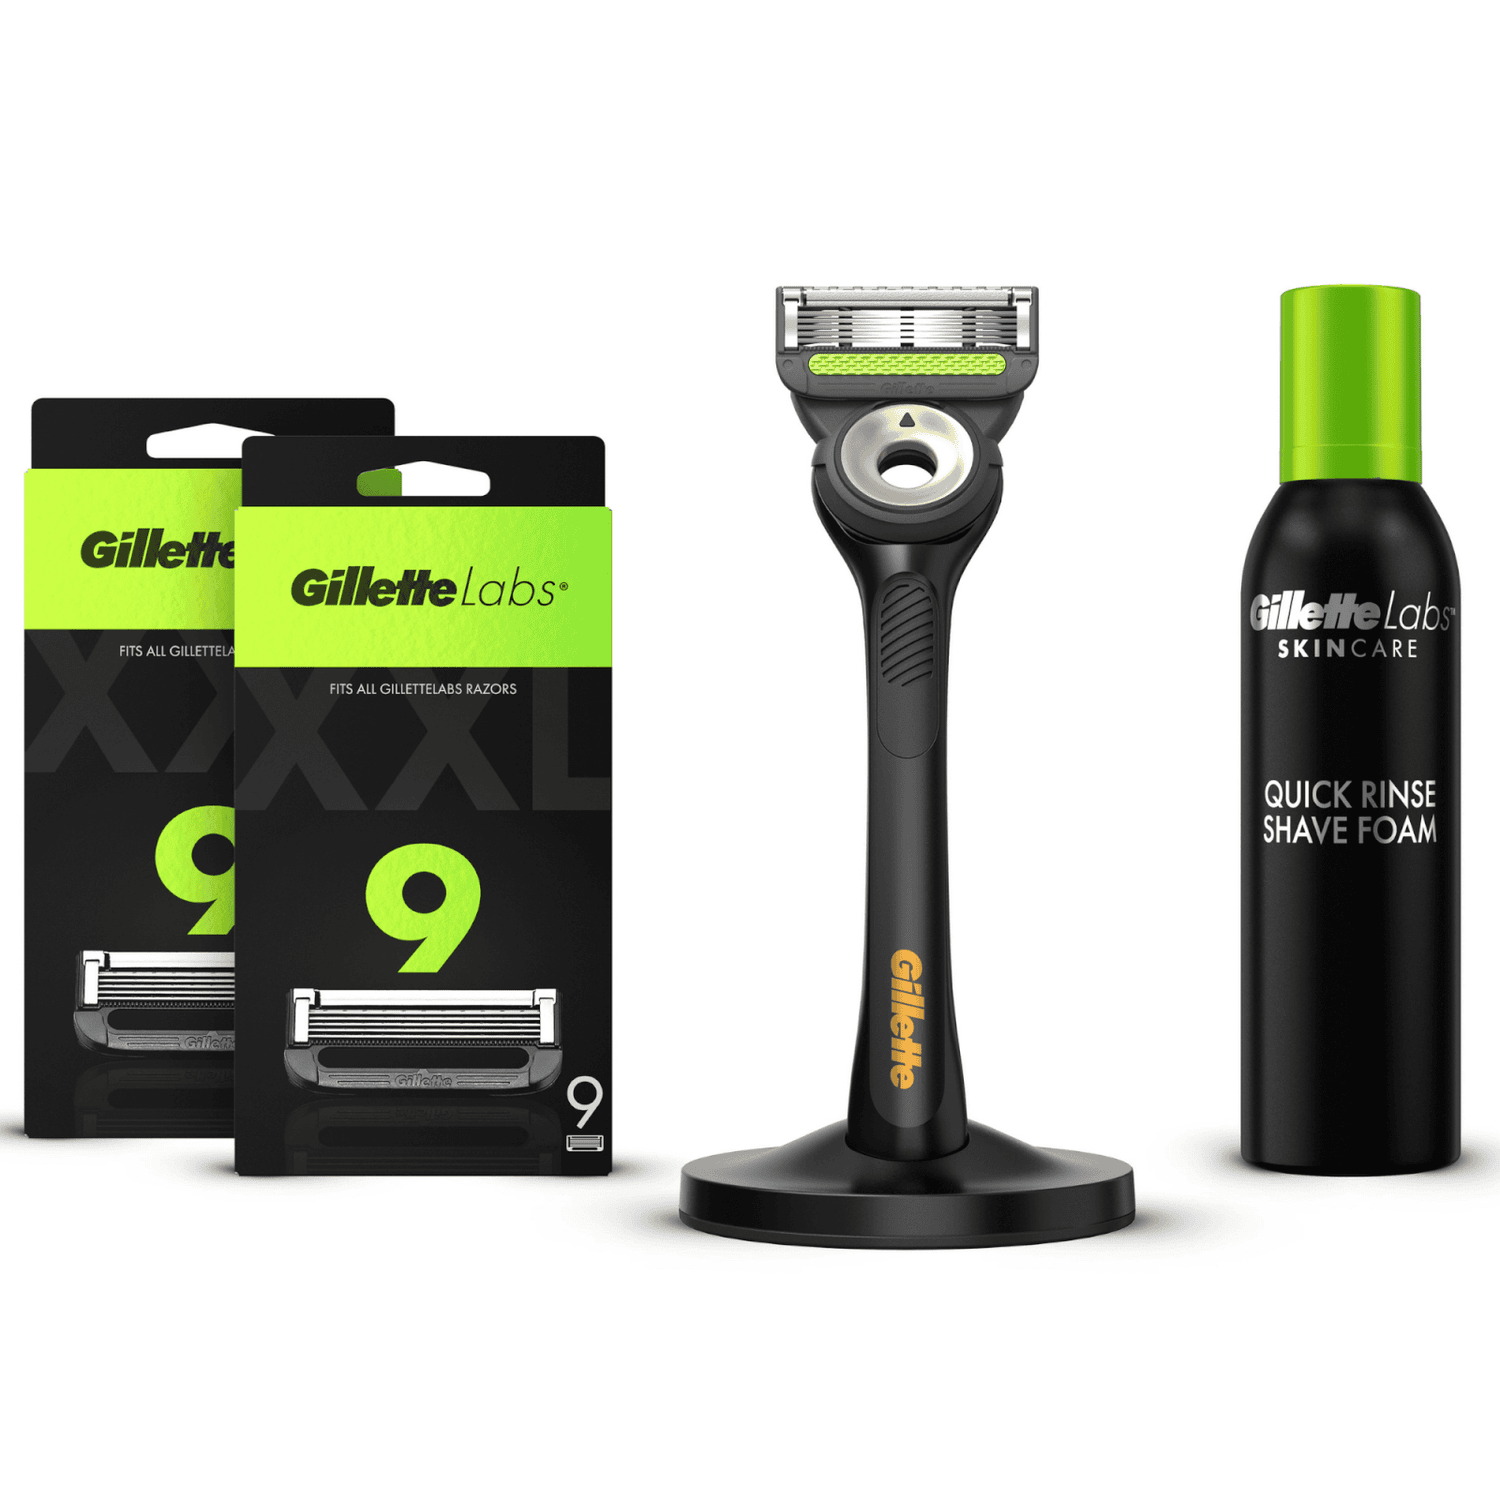 Gillette Labs Razor with Exfoliating Bar and Magnetic Stand (Black & Gold), Shaving Foam and 18 Count Blades